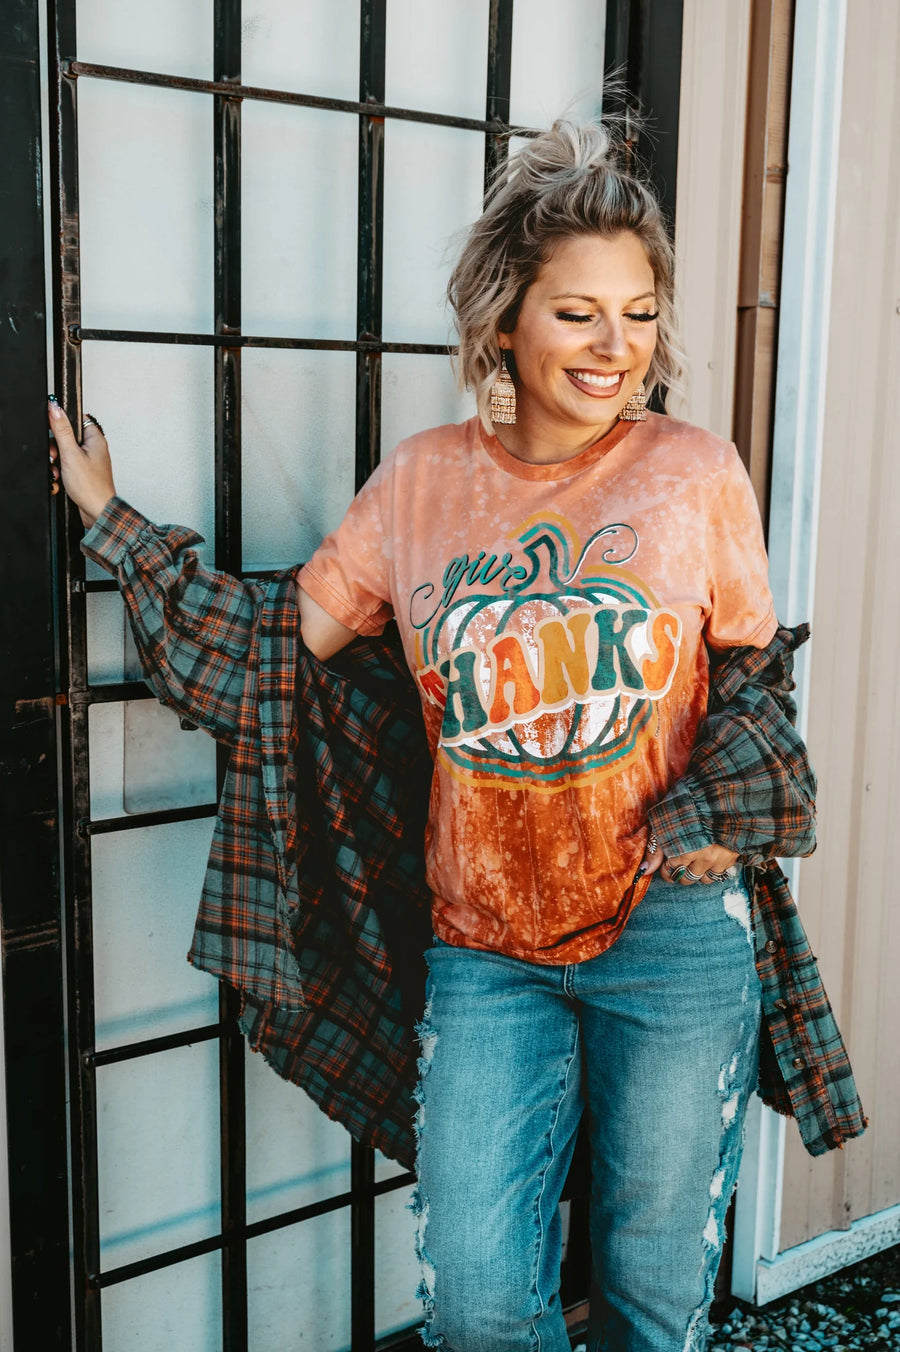 Give Thanks Pumpkin Graphic Tee